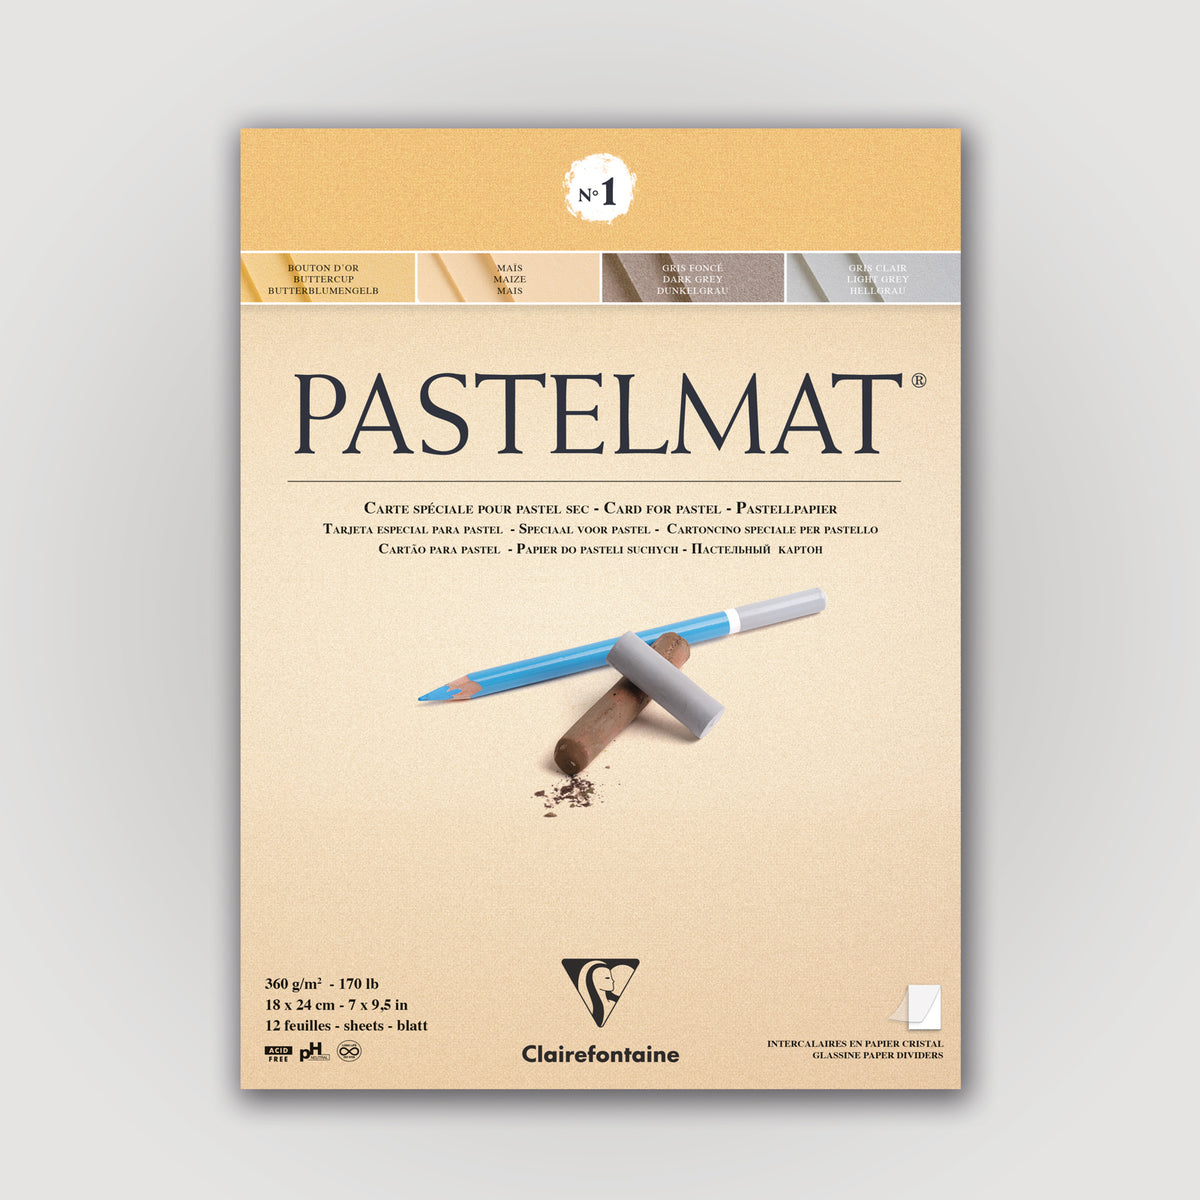 Clairefontaine Pastelmat N°1 360g 18x24 ass 12 sheets